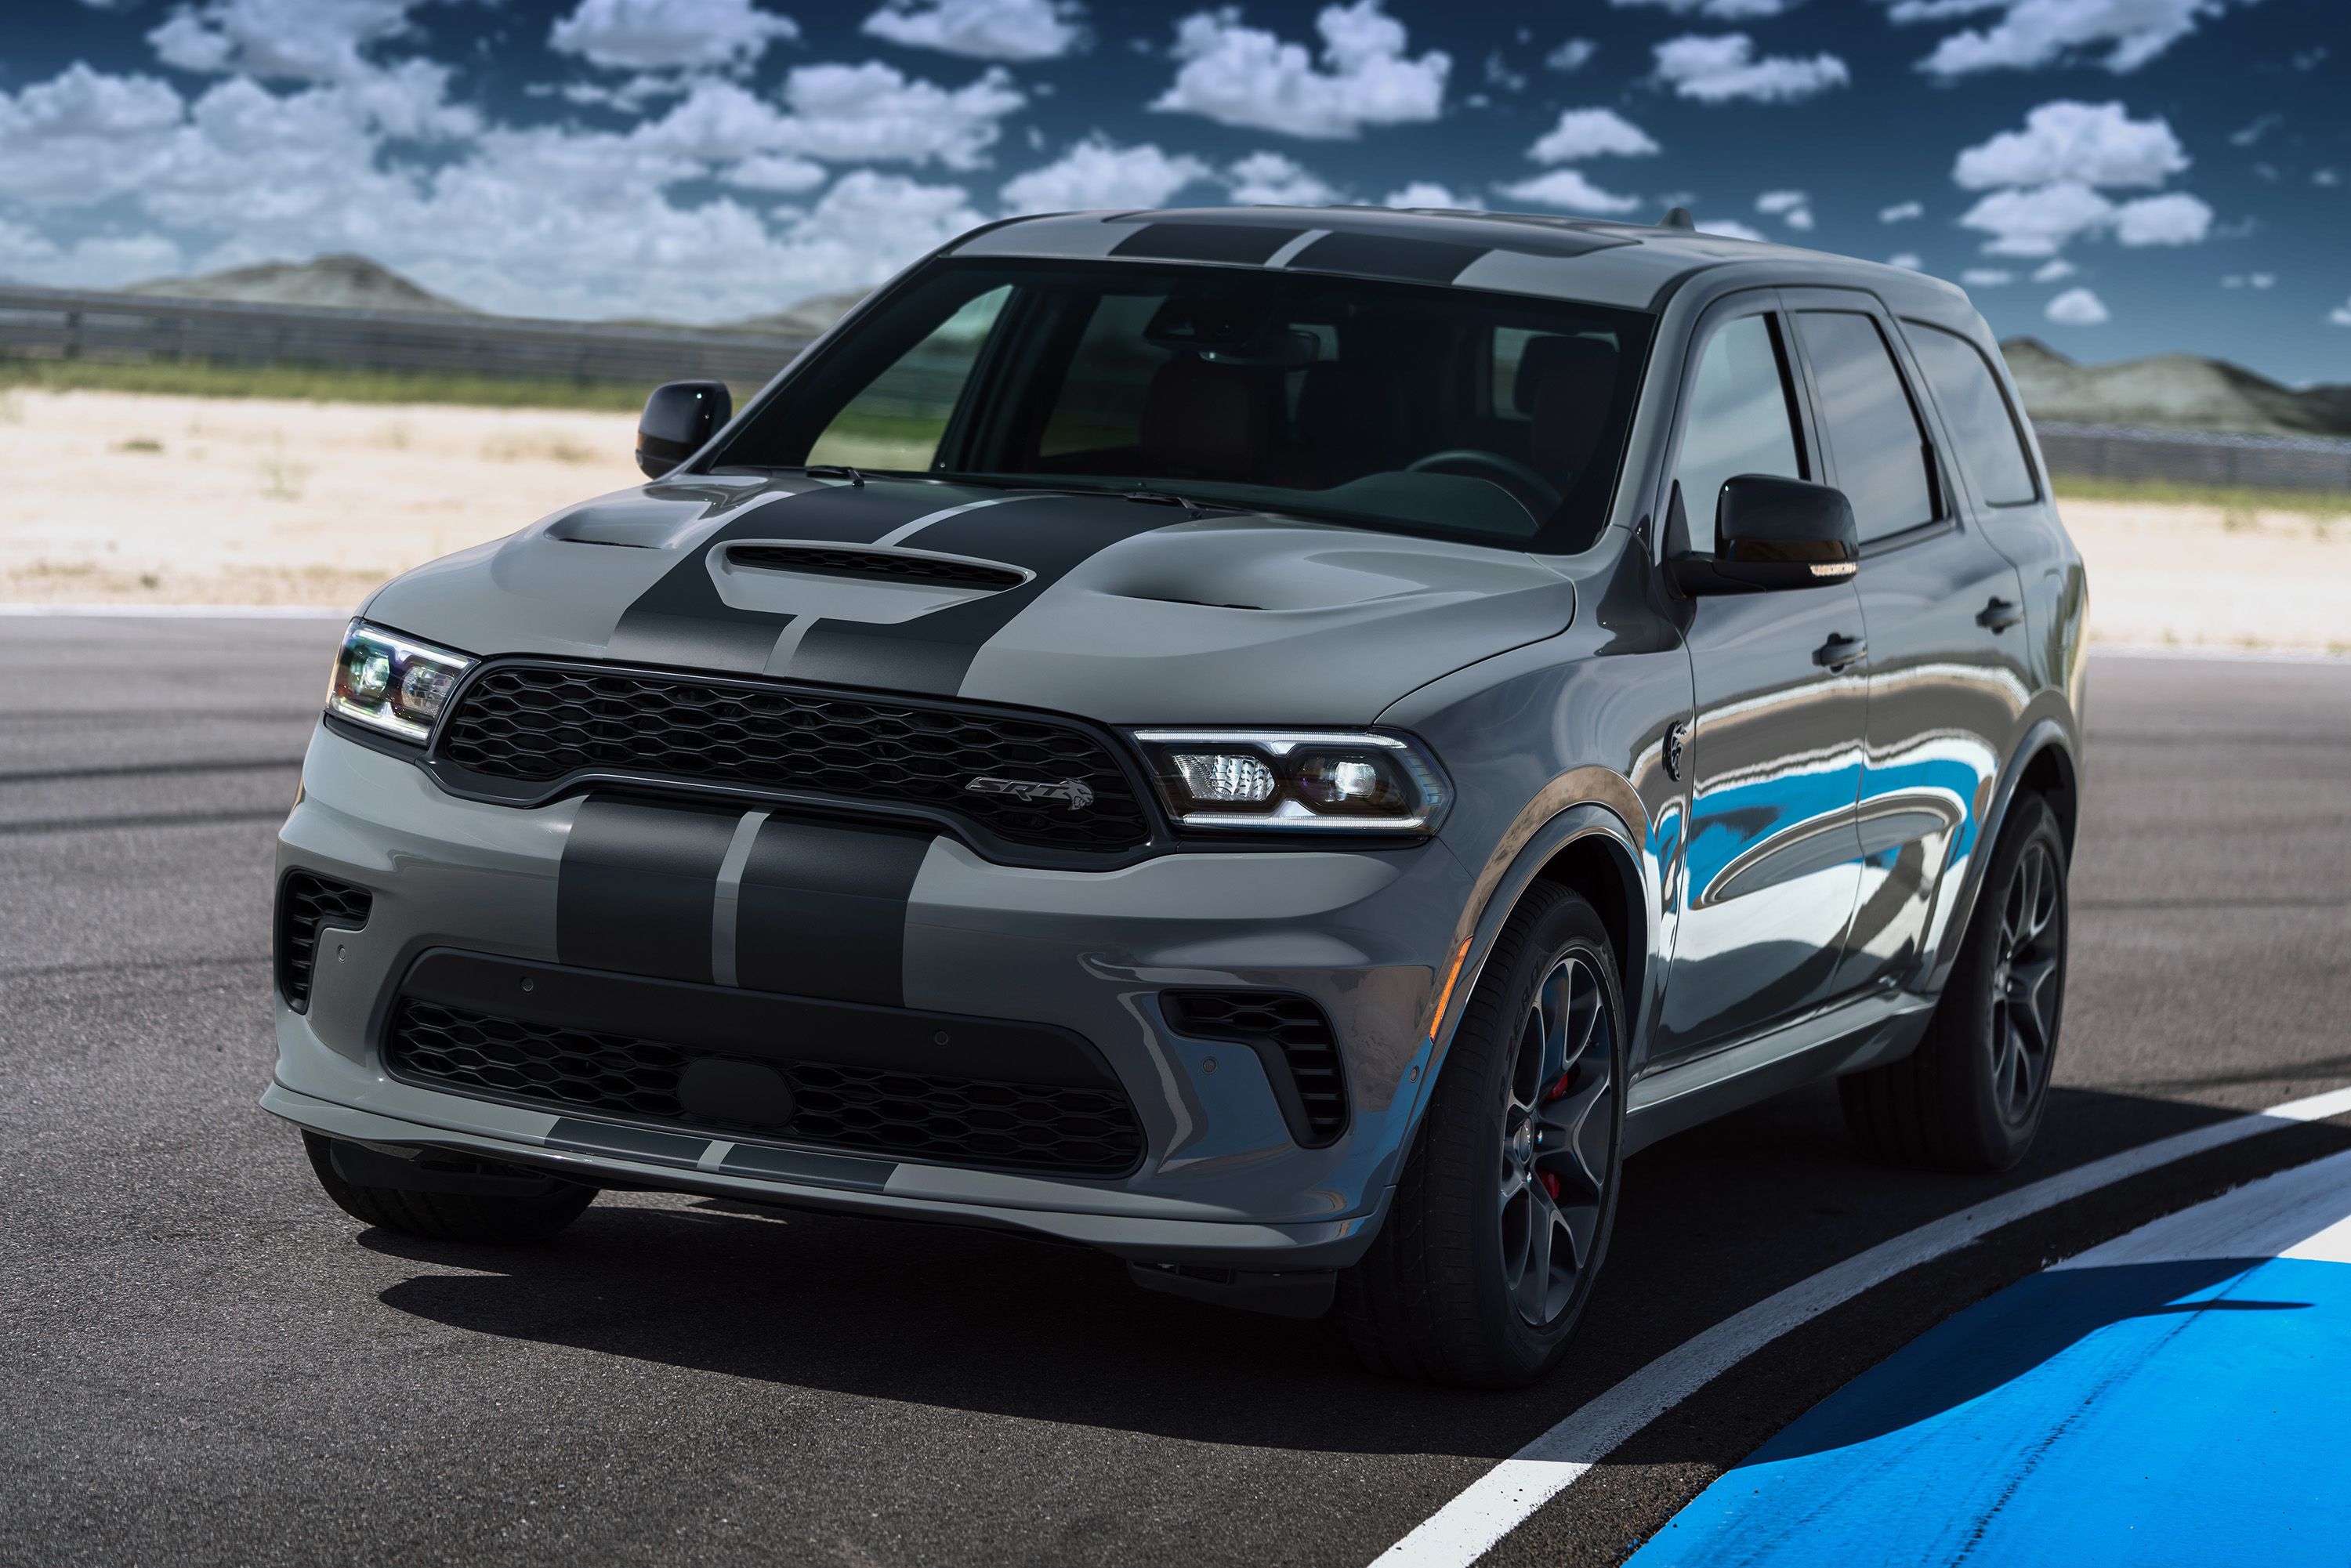 2020 The 2021 Dodge Durango Is About More Than a Facelift Thanks to the New 710-Horsepower SRT Hellcat Trim